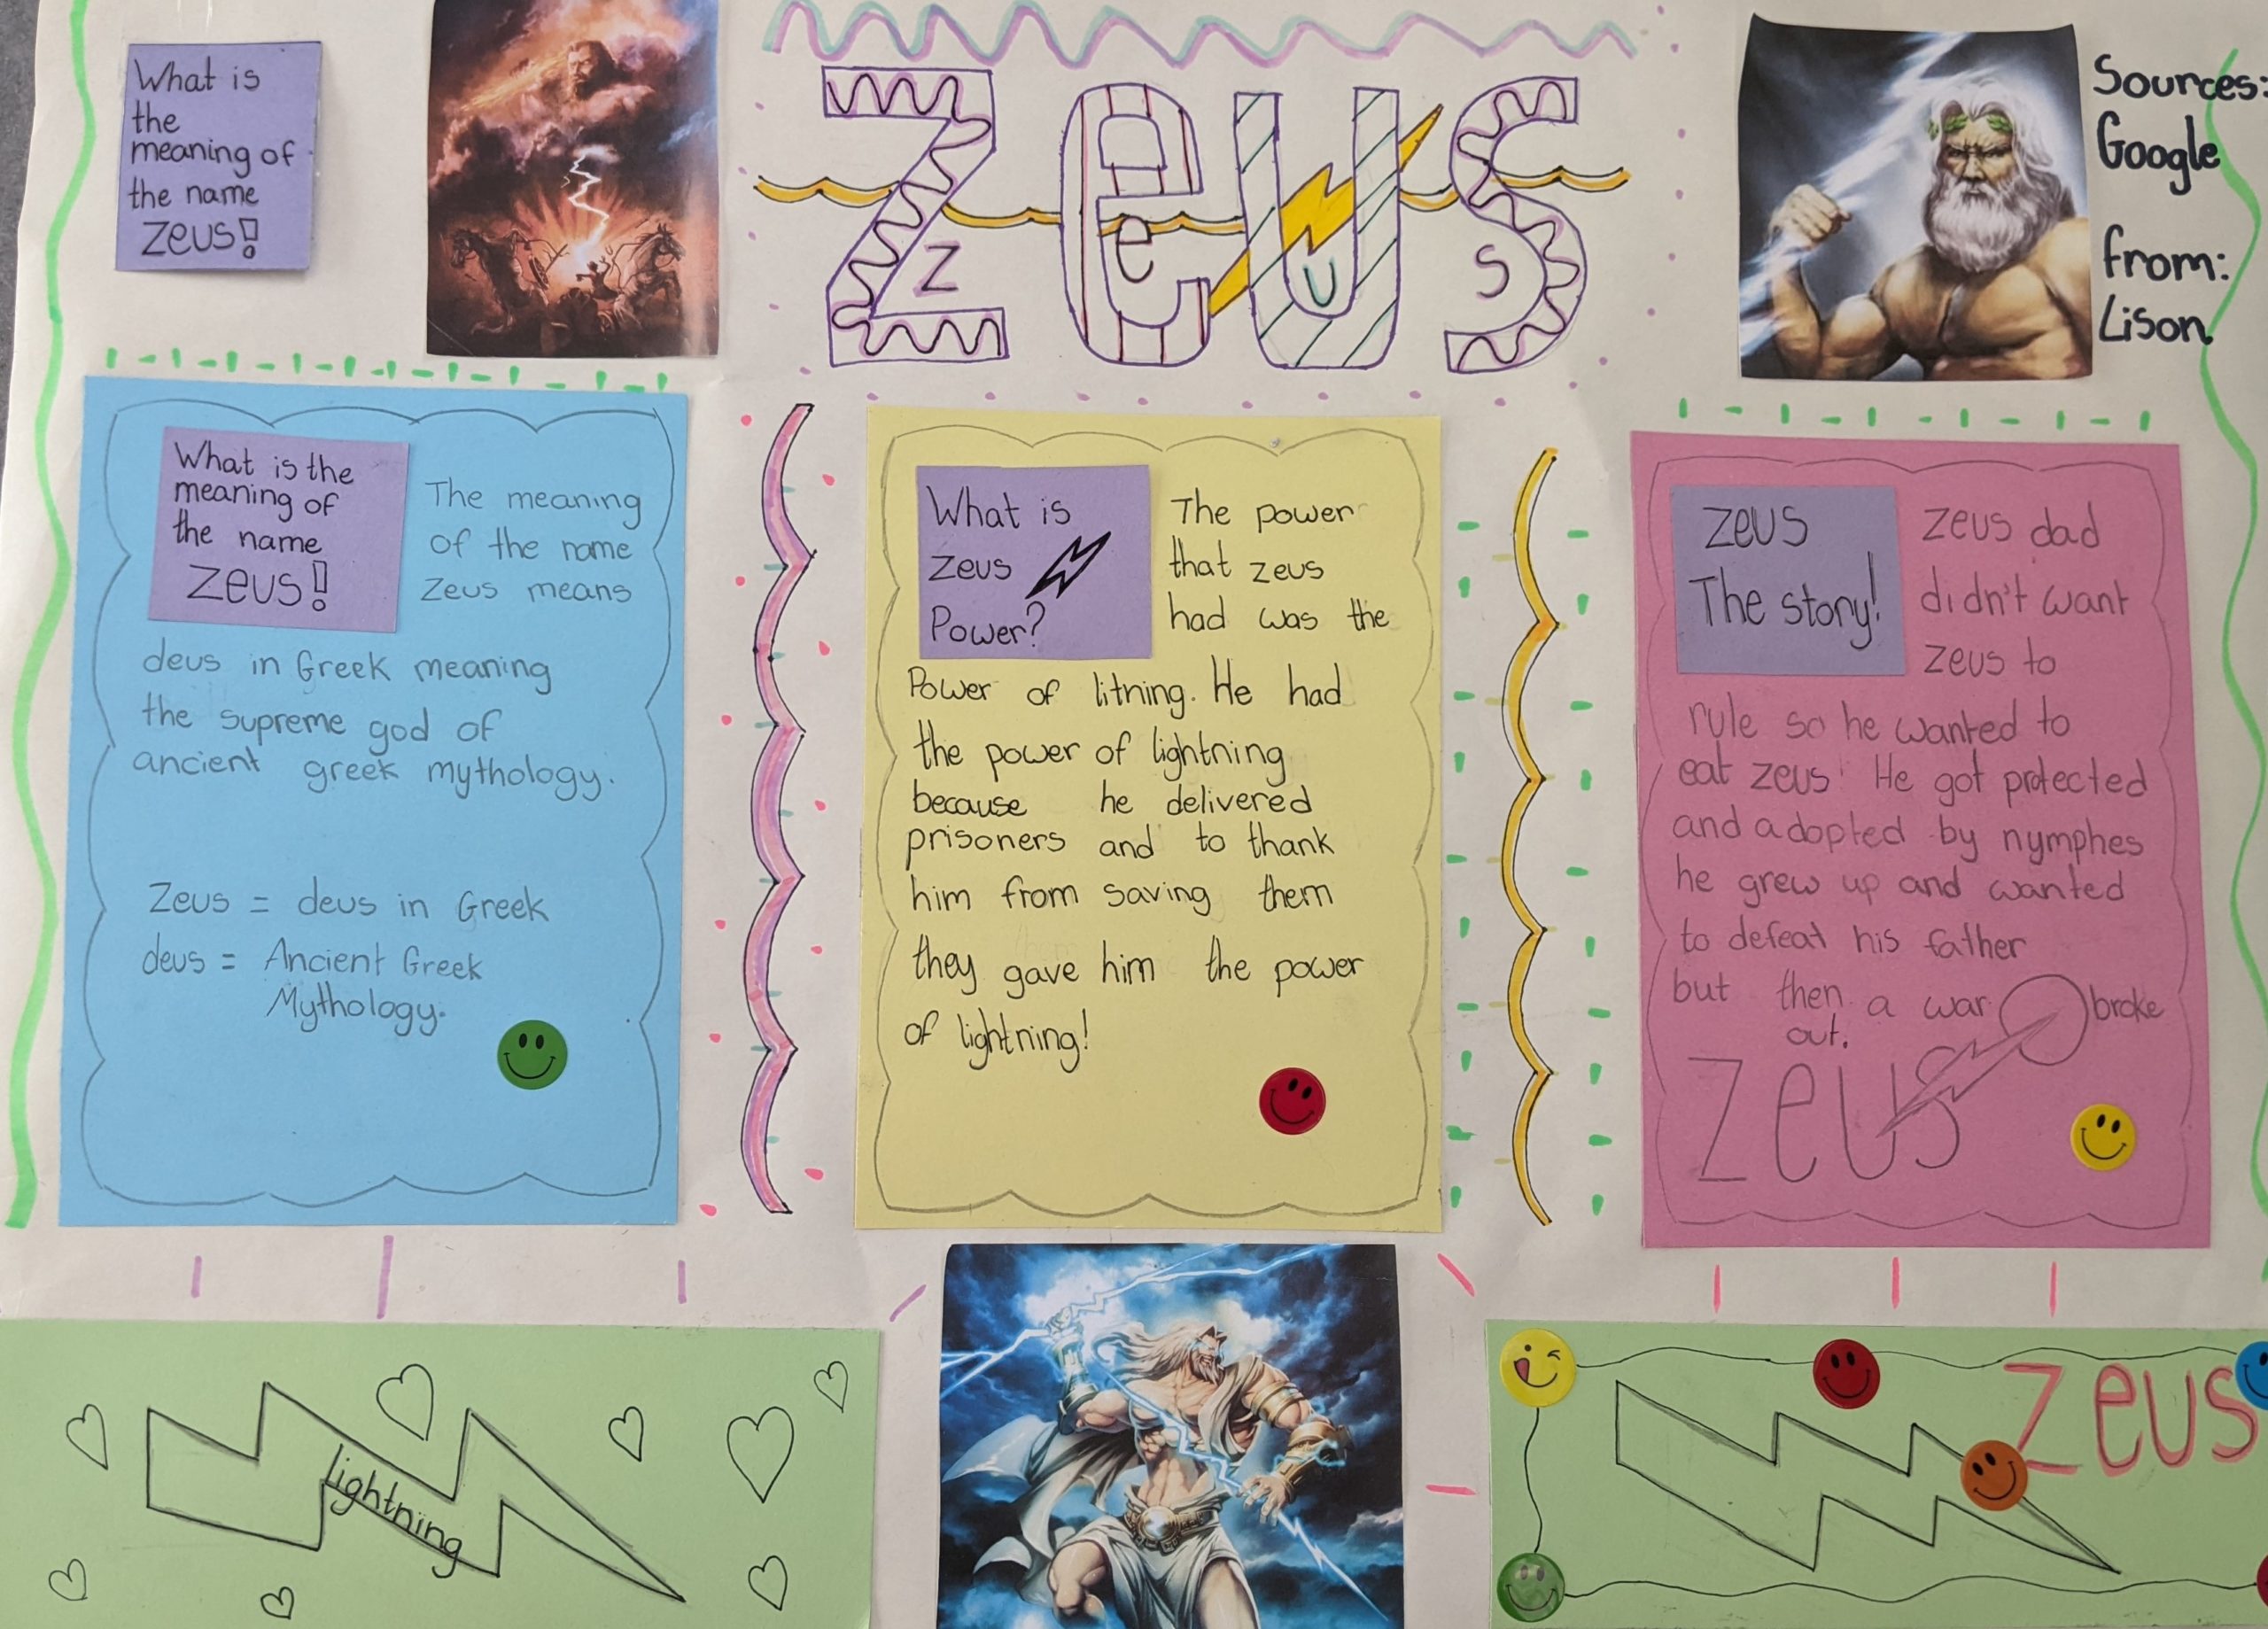 A poster with facts and images of Zeus